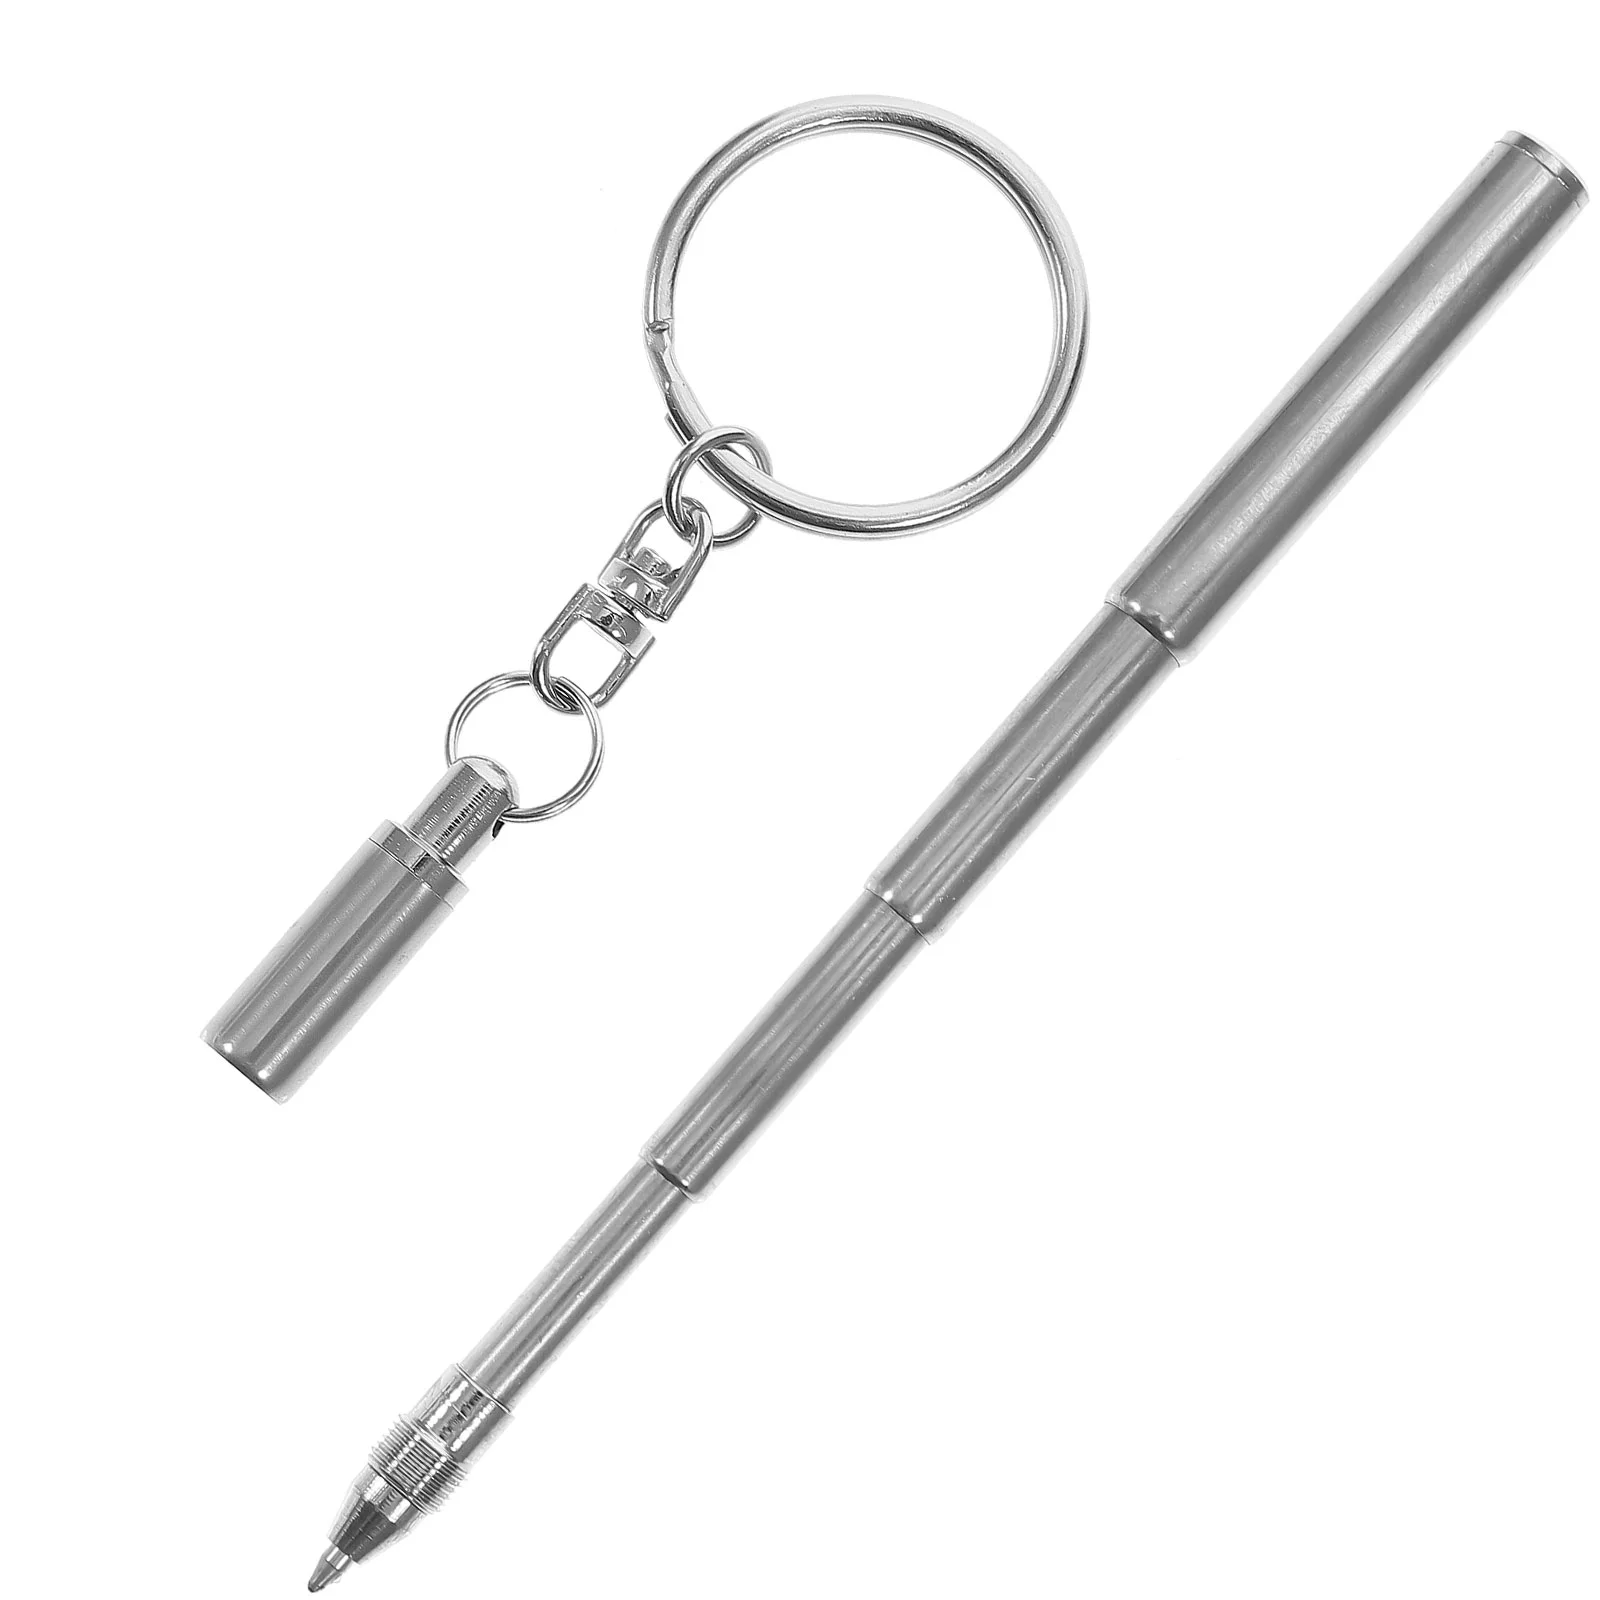 Retractable Pen Shape Keychain Mini Metal Key Ring Portable Stainless Steel Telescopic The Tools Keychain Tools fashion portable velvet jewelry ring jewelry display organizer box tray holder earring jewelry storage case showcase locket box